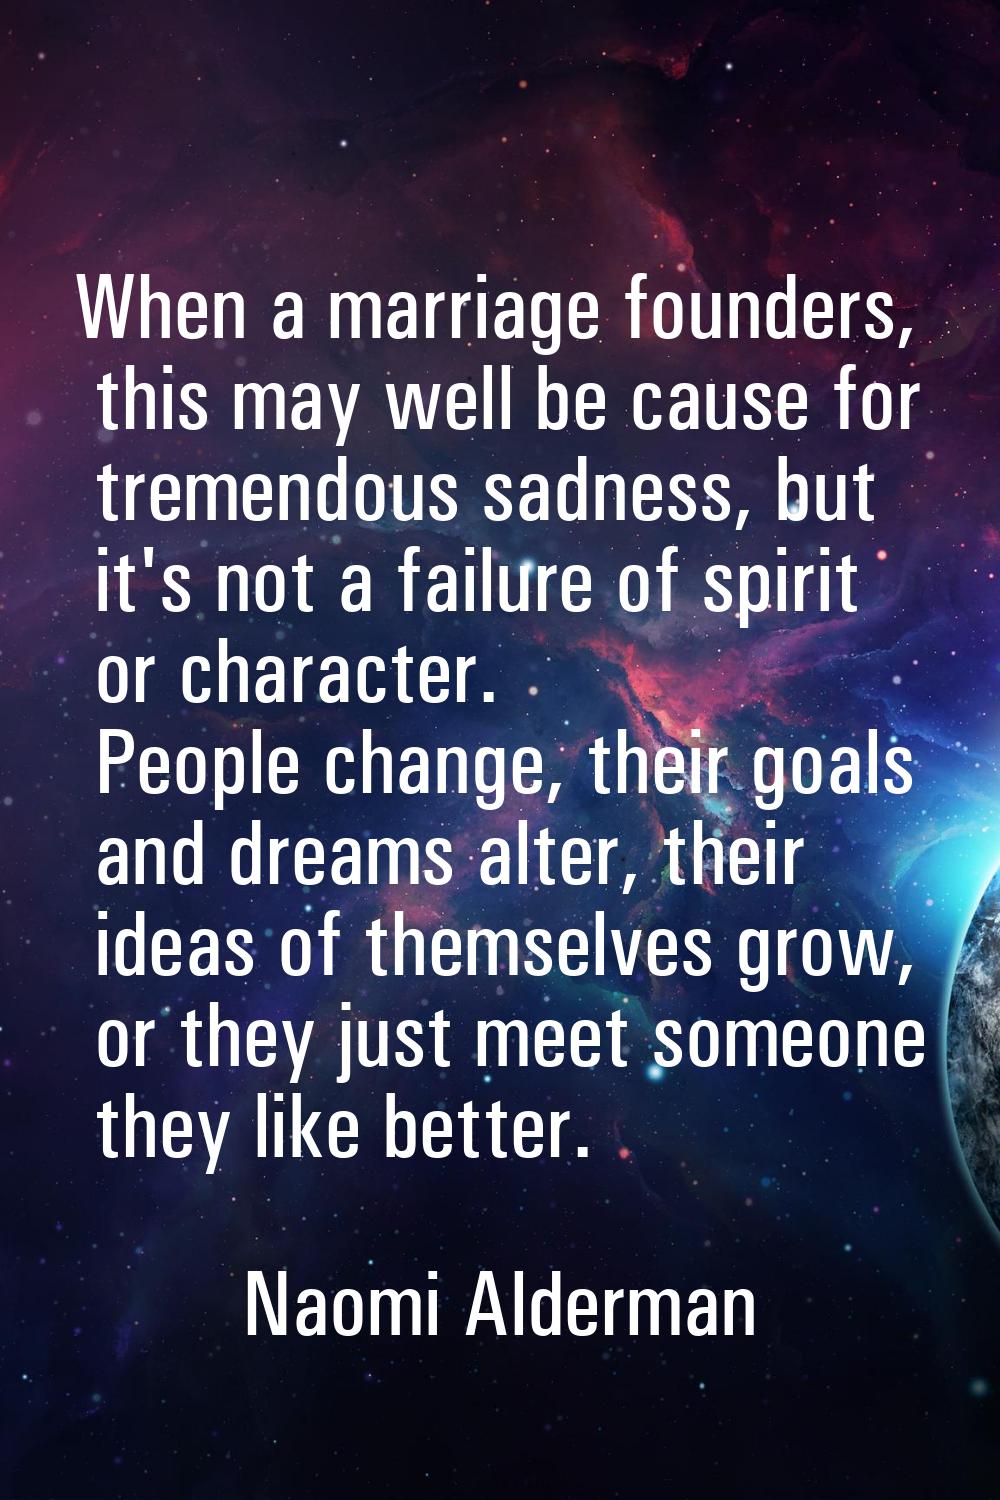 When a marriage founders, this may well be cause for tremendous sadness, but it's not a failure of 